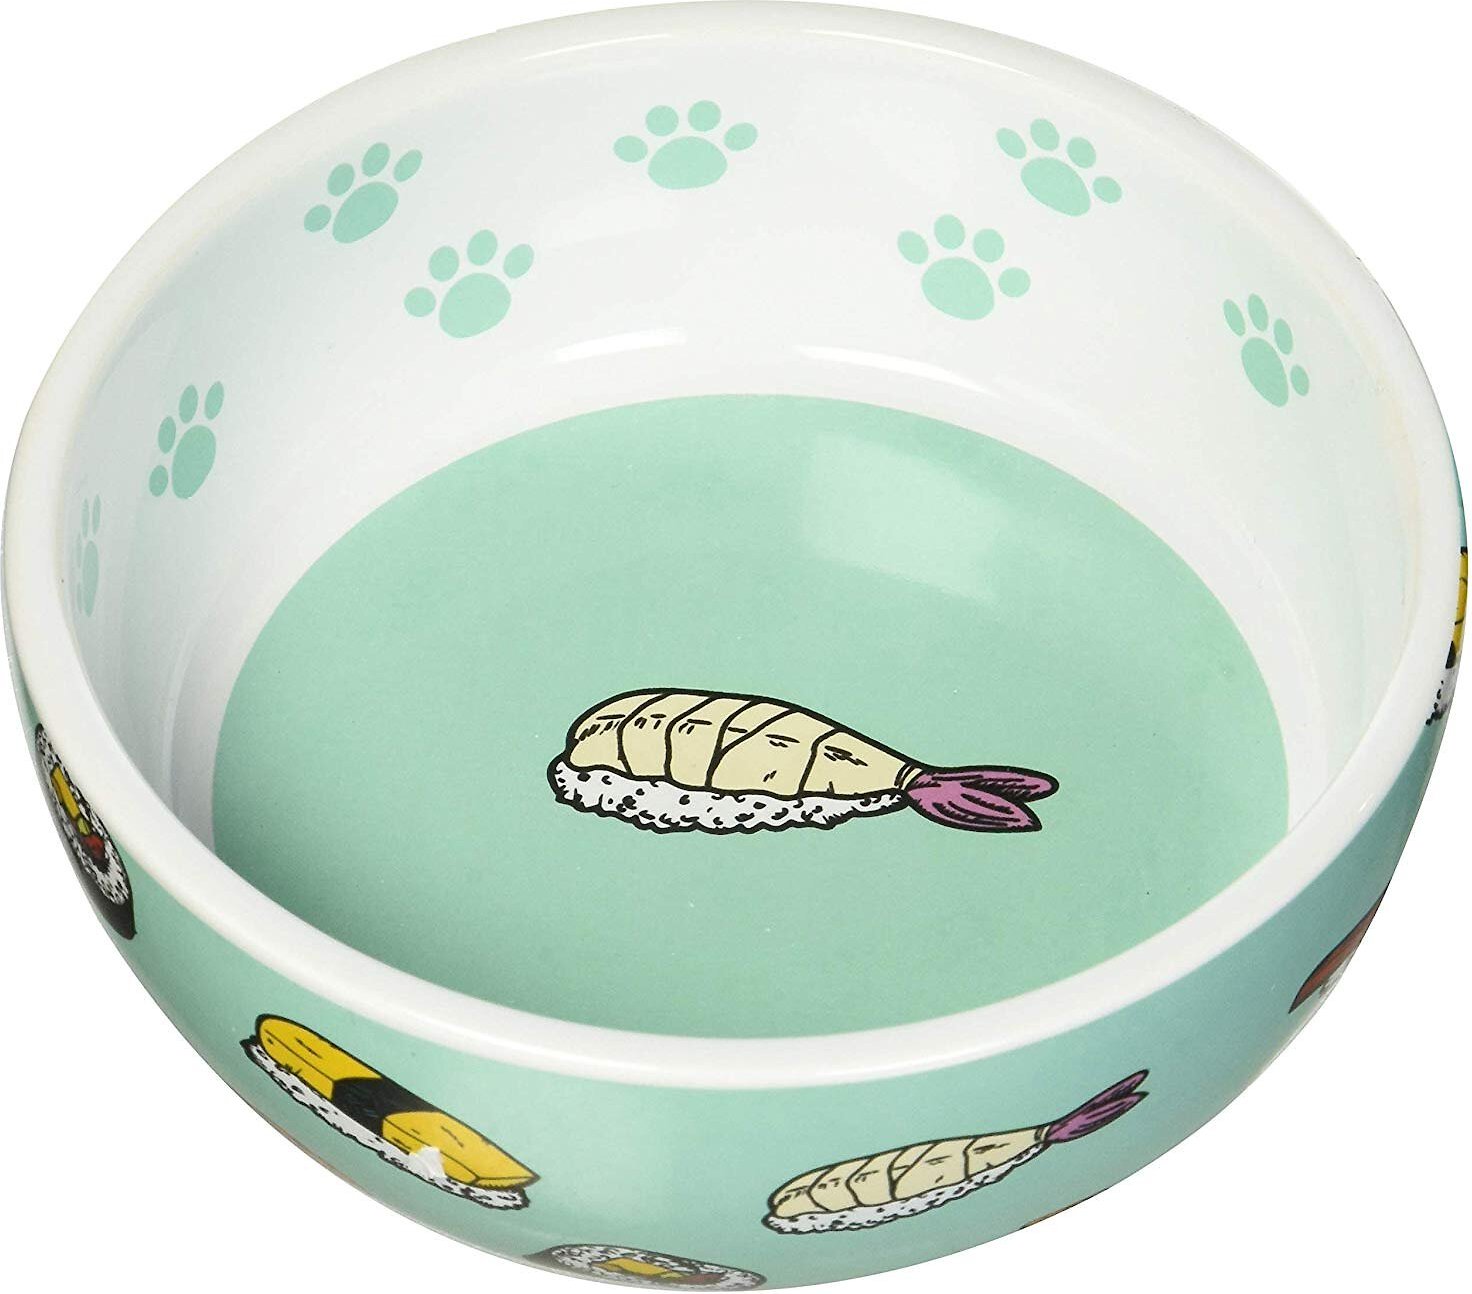 Stoneware Dishwasher Safe Cat and Dog Saucer 2.5-Ounce 5-Inch Diameter 1-Inch Tall for Small Dogs and Cats Blue PetRageous 17016 Sushi Time